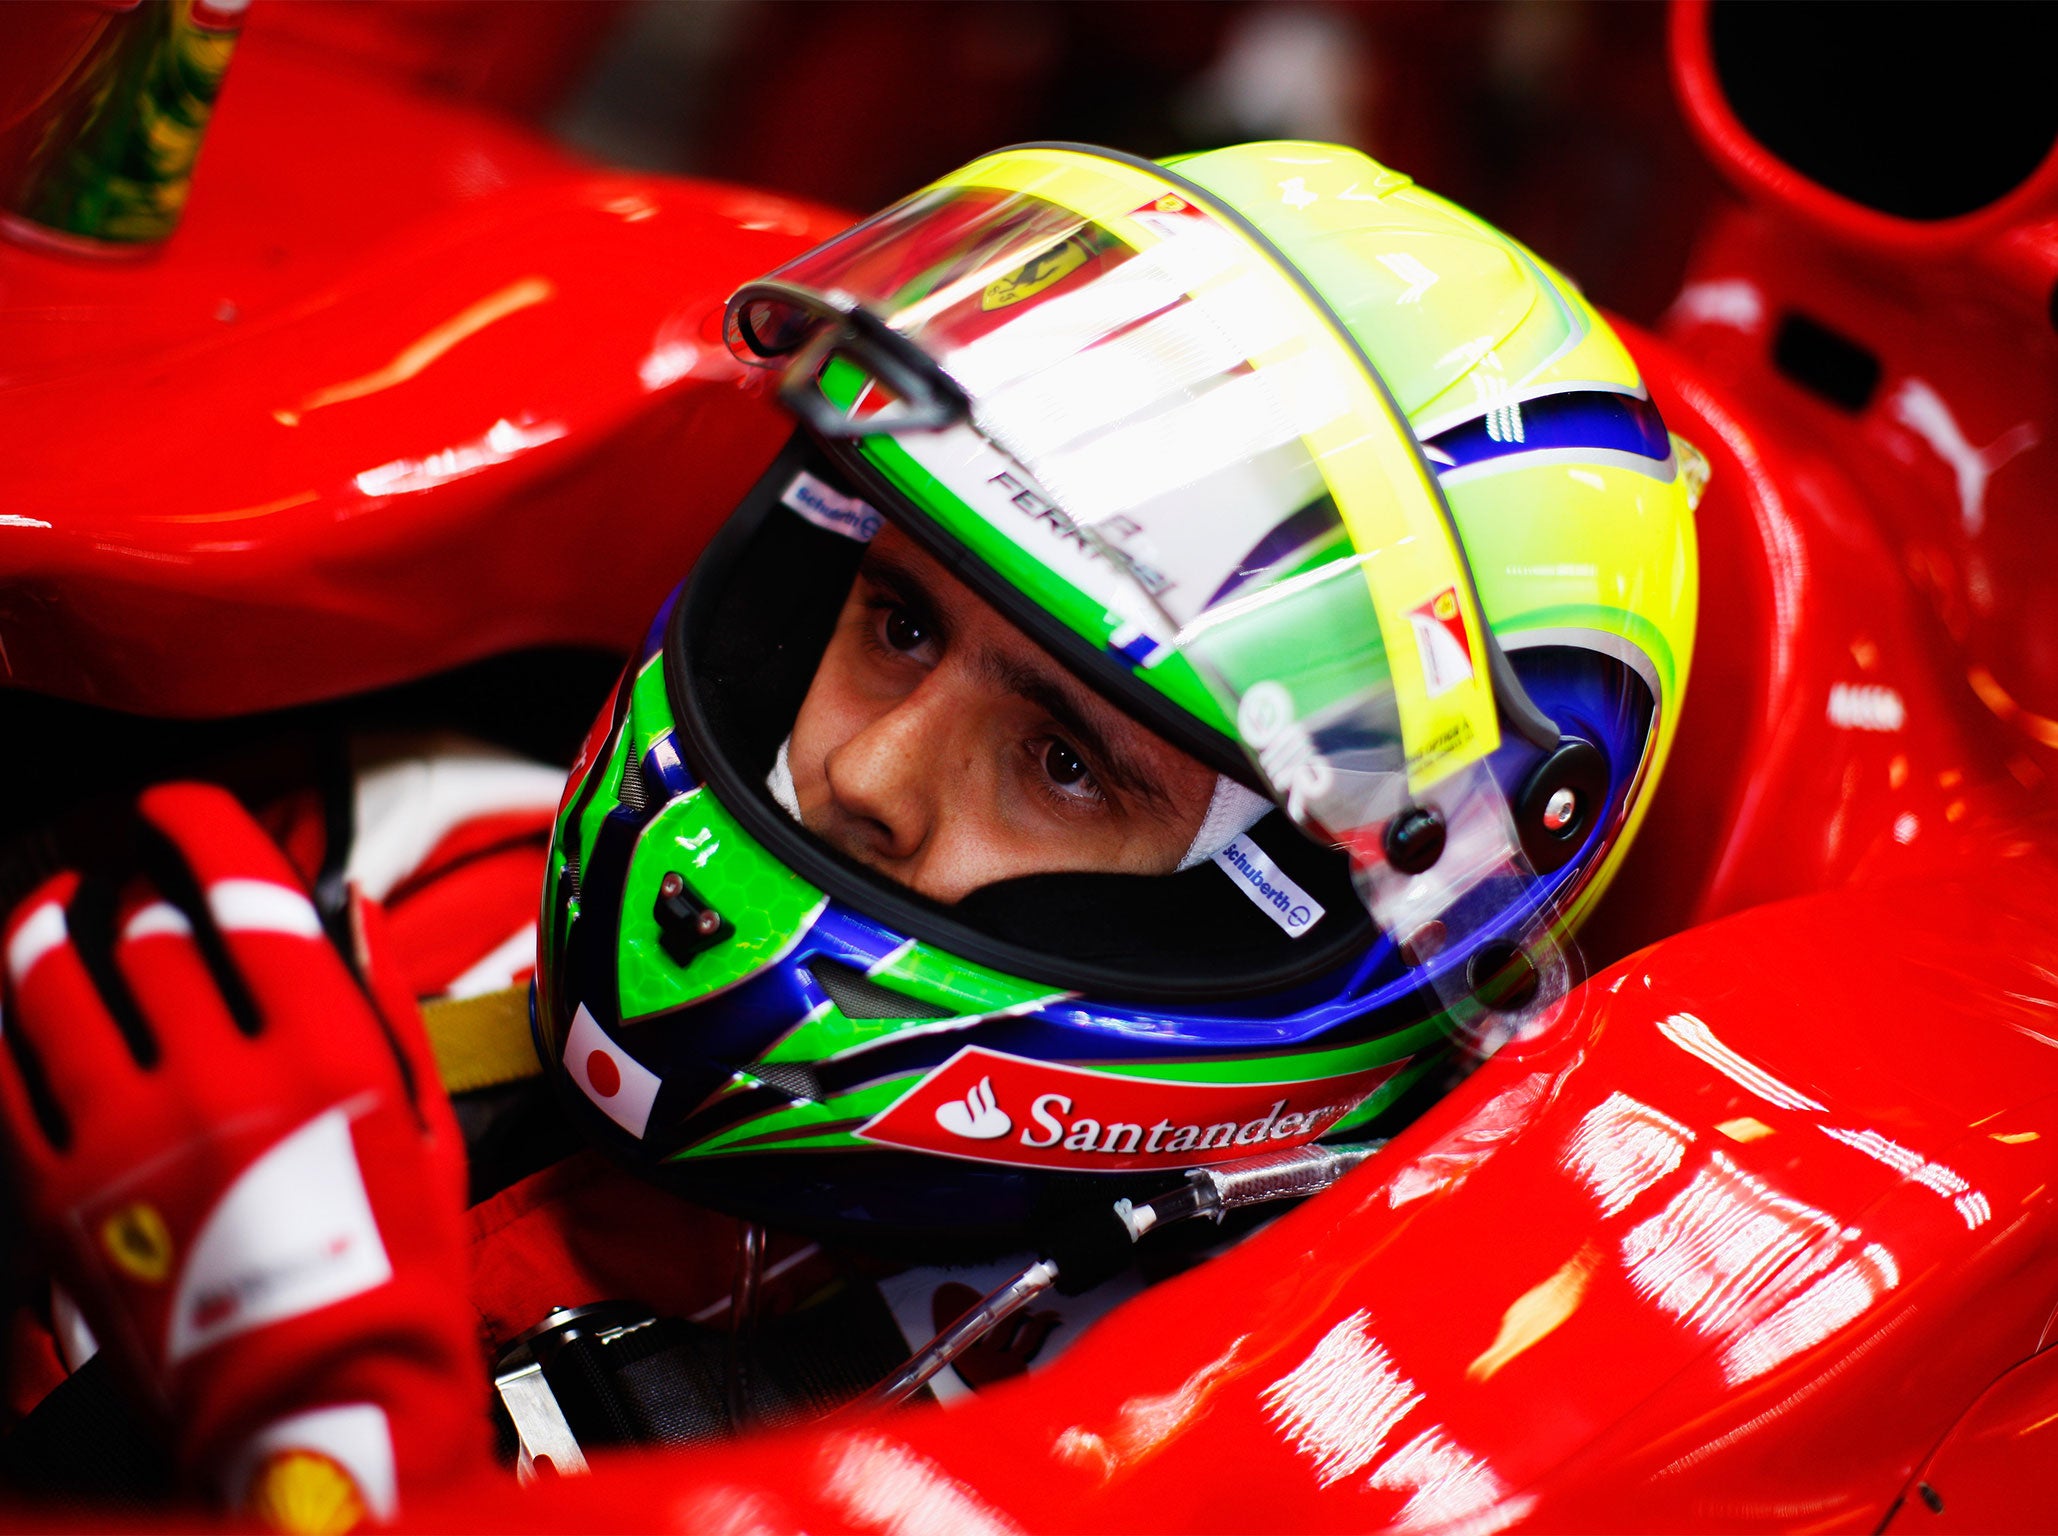 Massa is best-known for his stint with Ferrari